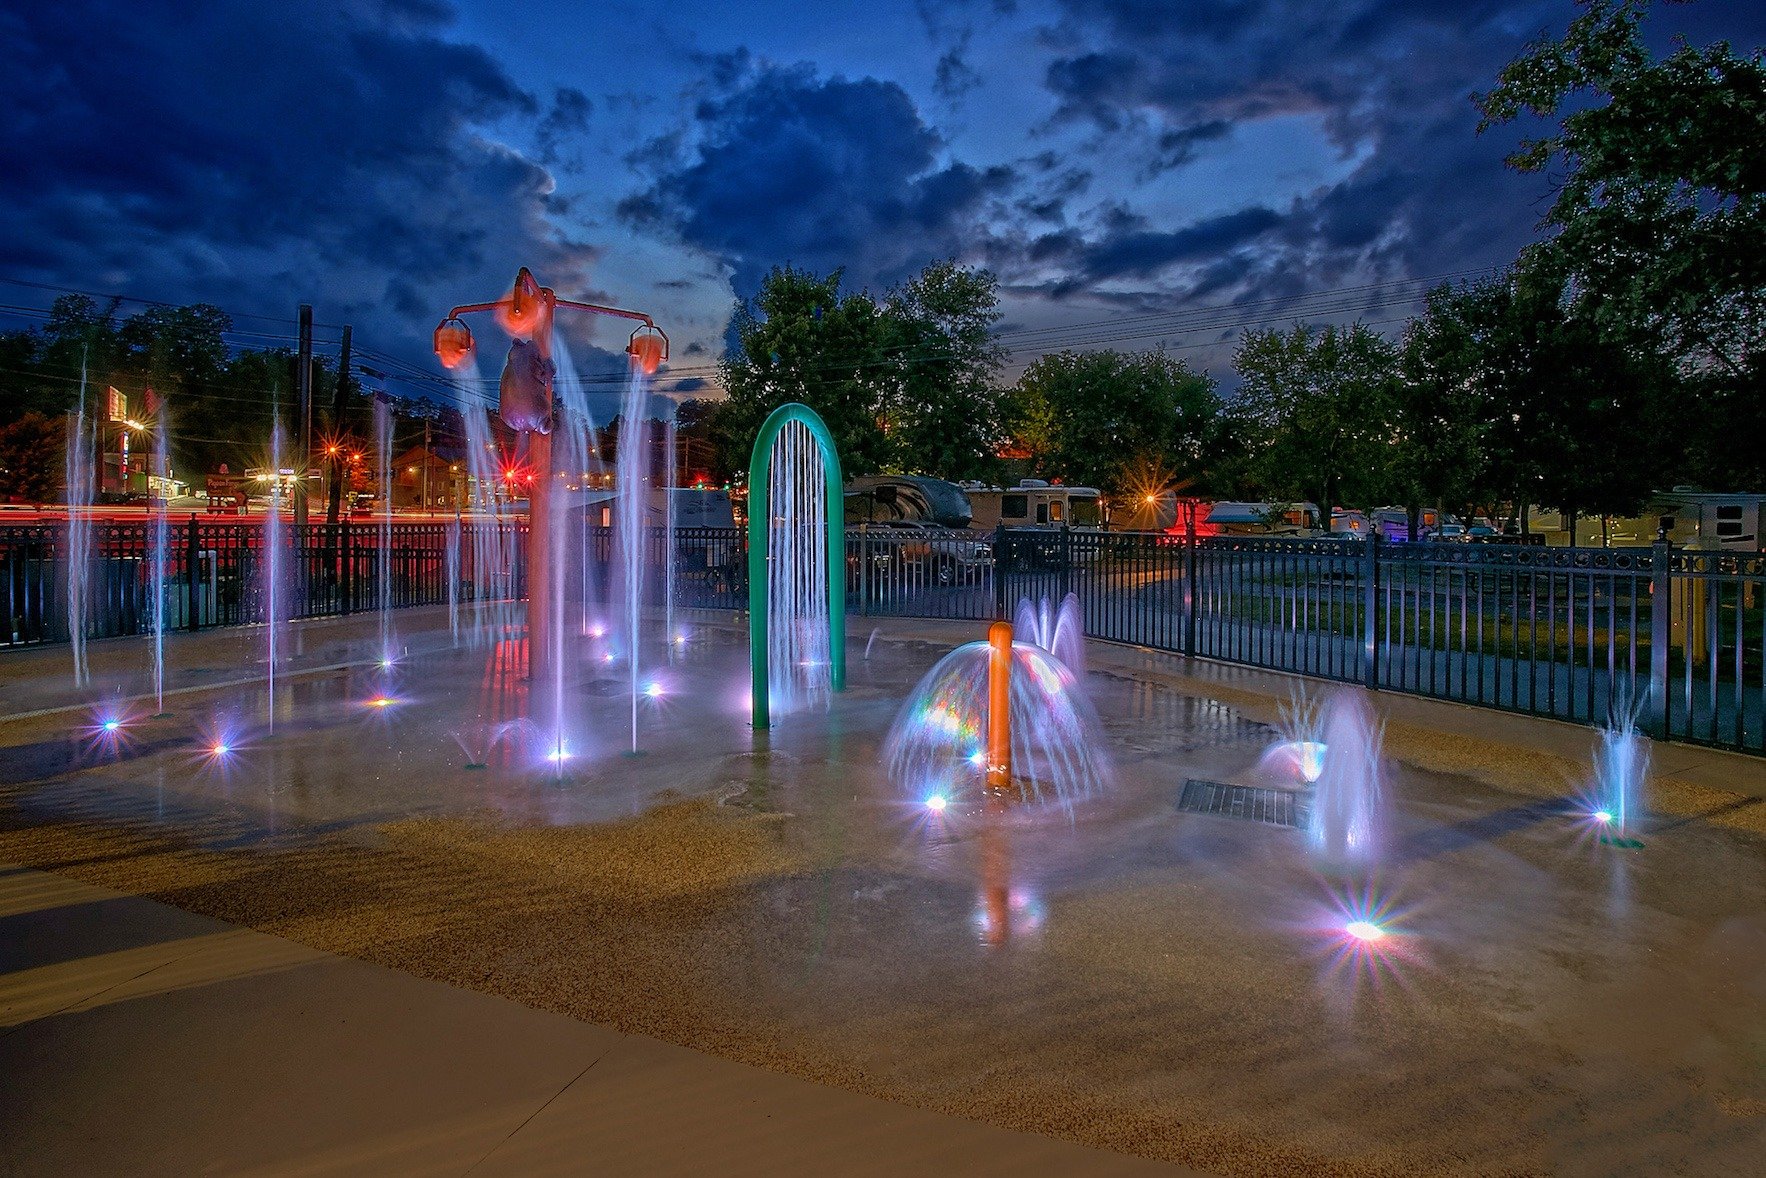 Enjoy your vacation in our splashpad in Pigeon Forge, TN